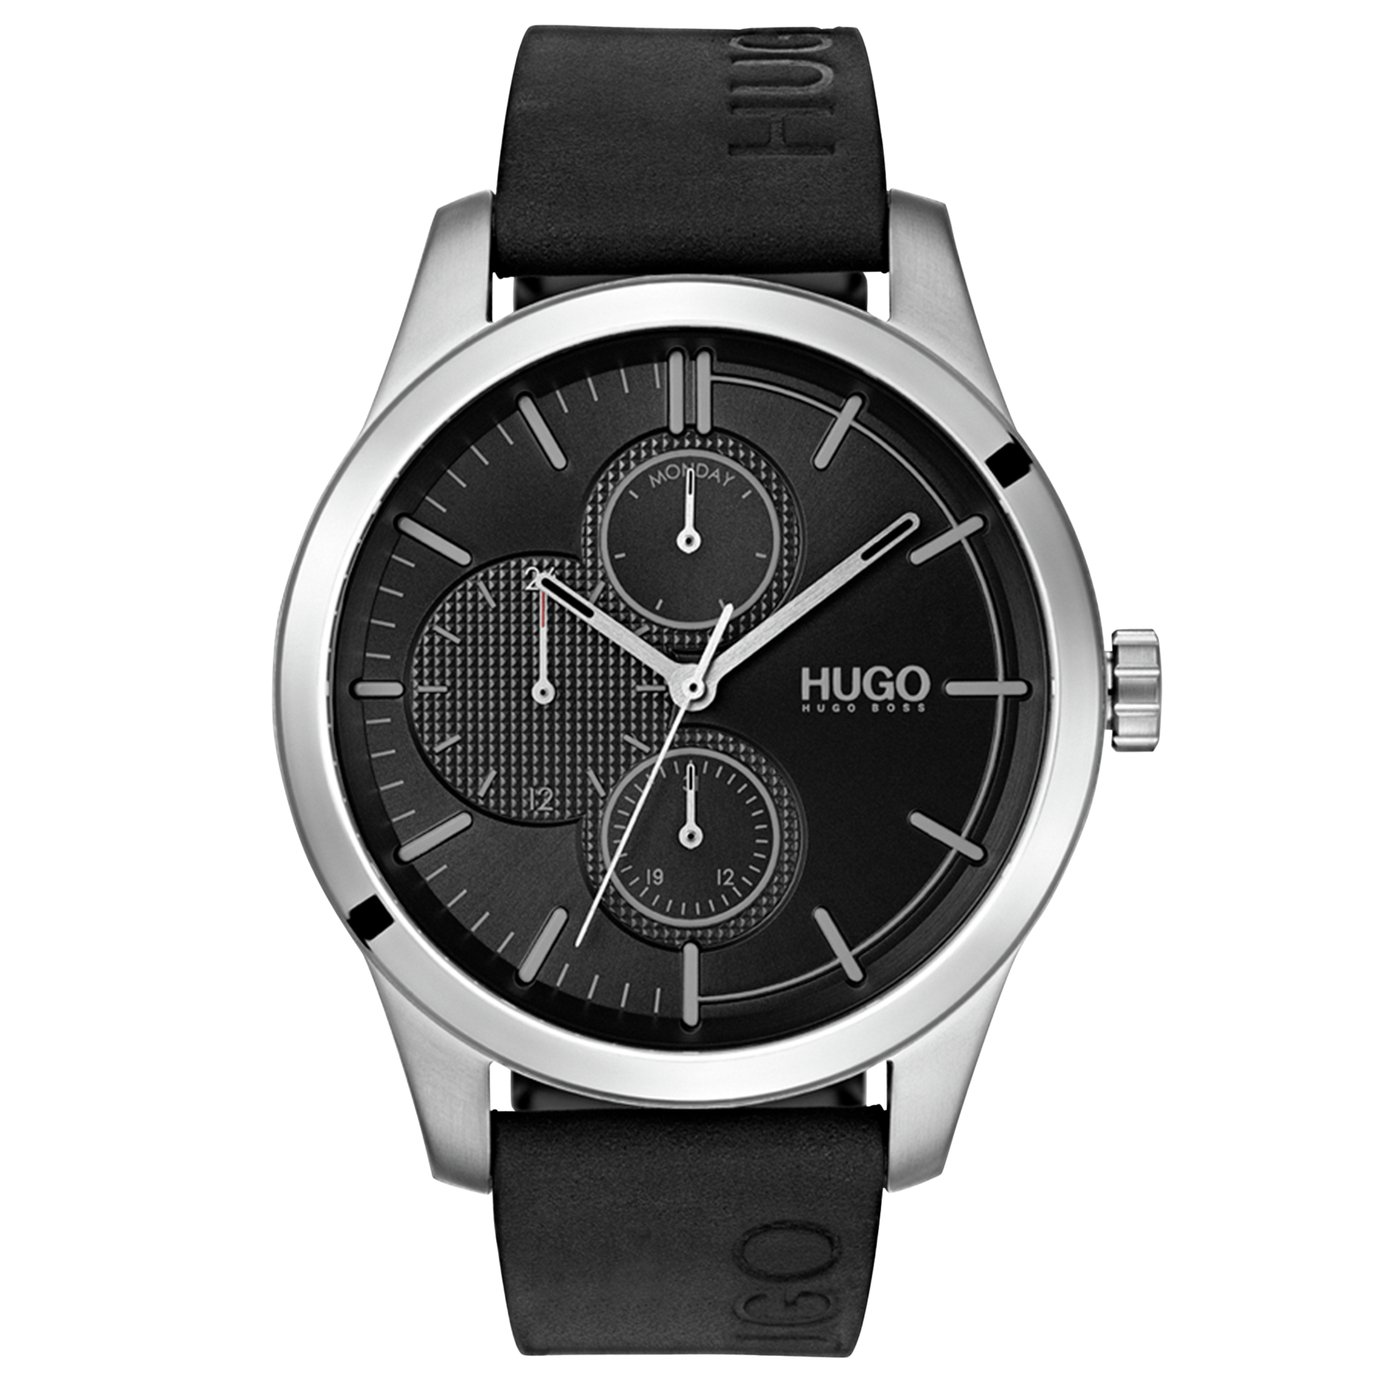 Results for hugo boss watches in 